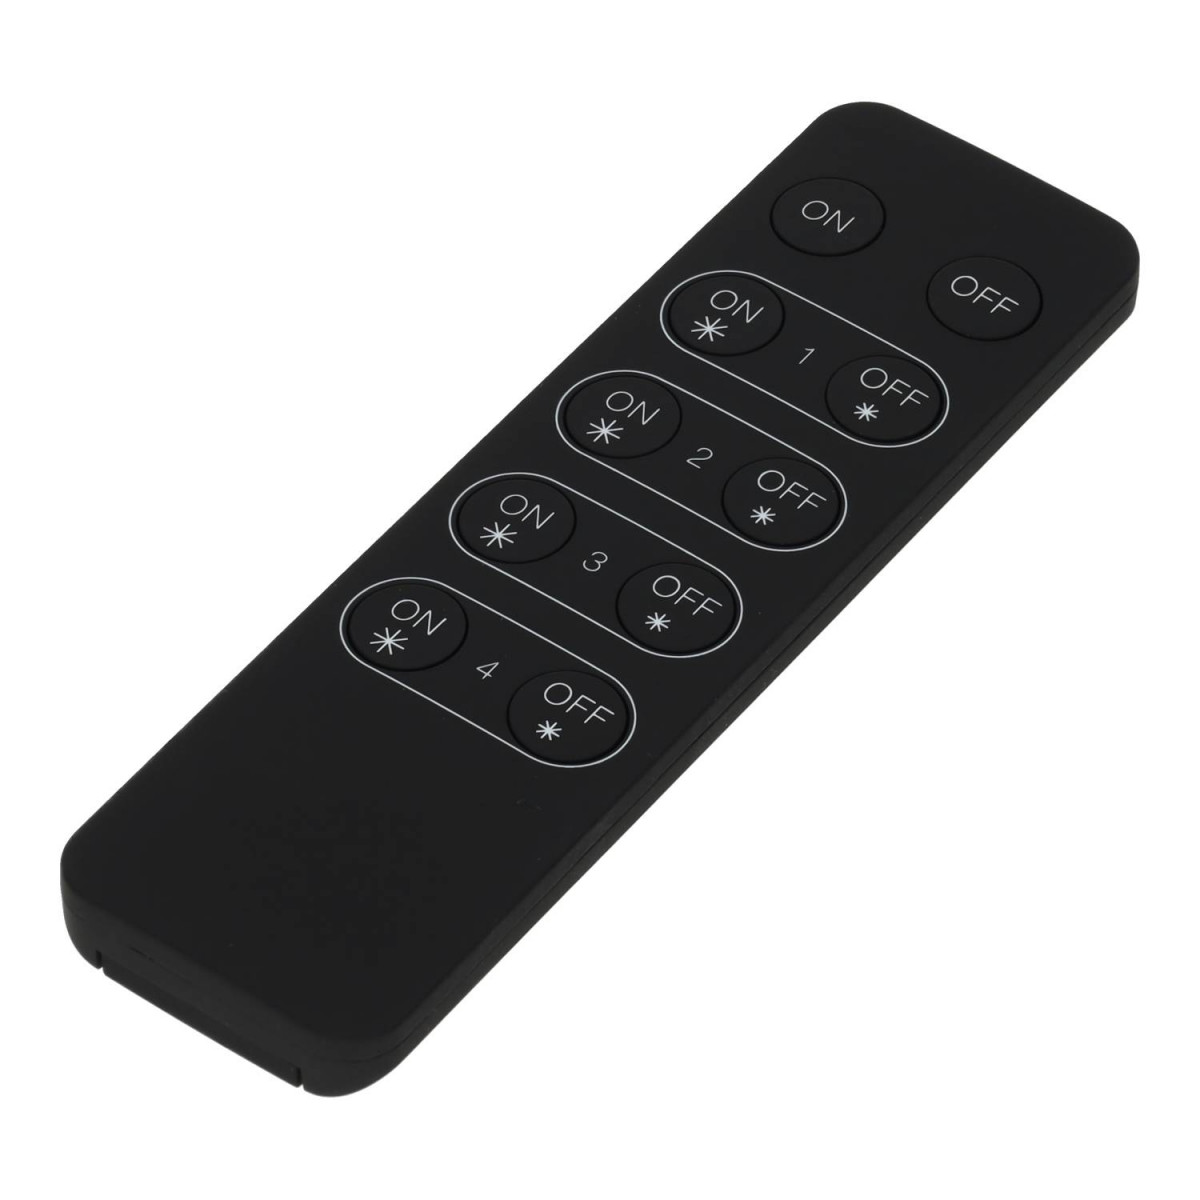 Remote controller for LED dimmer